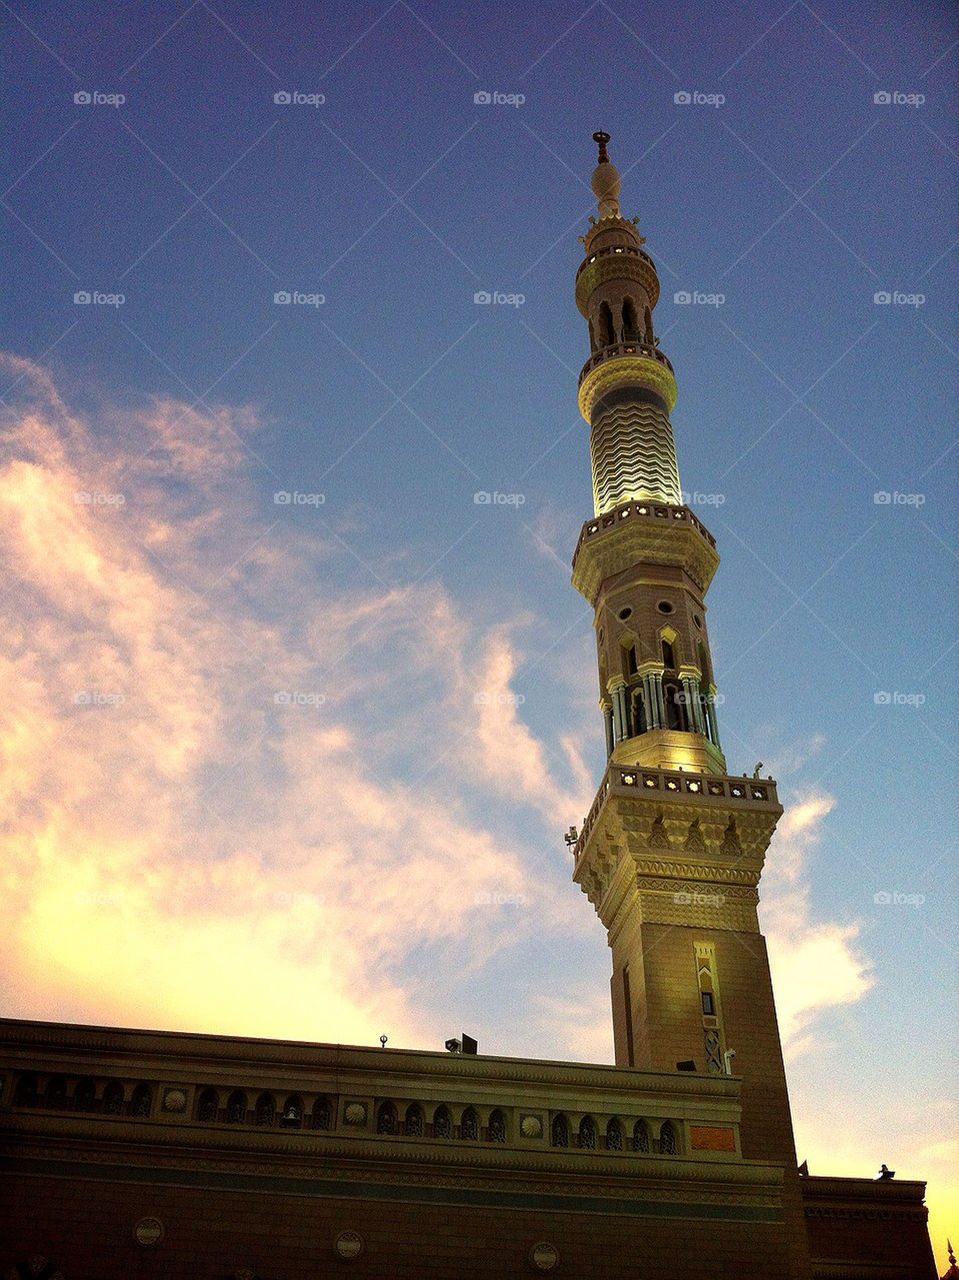 Fajr in Nabawi